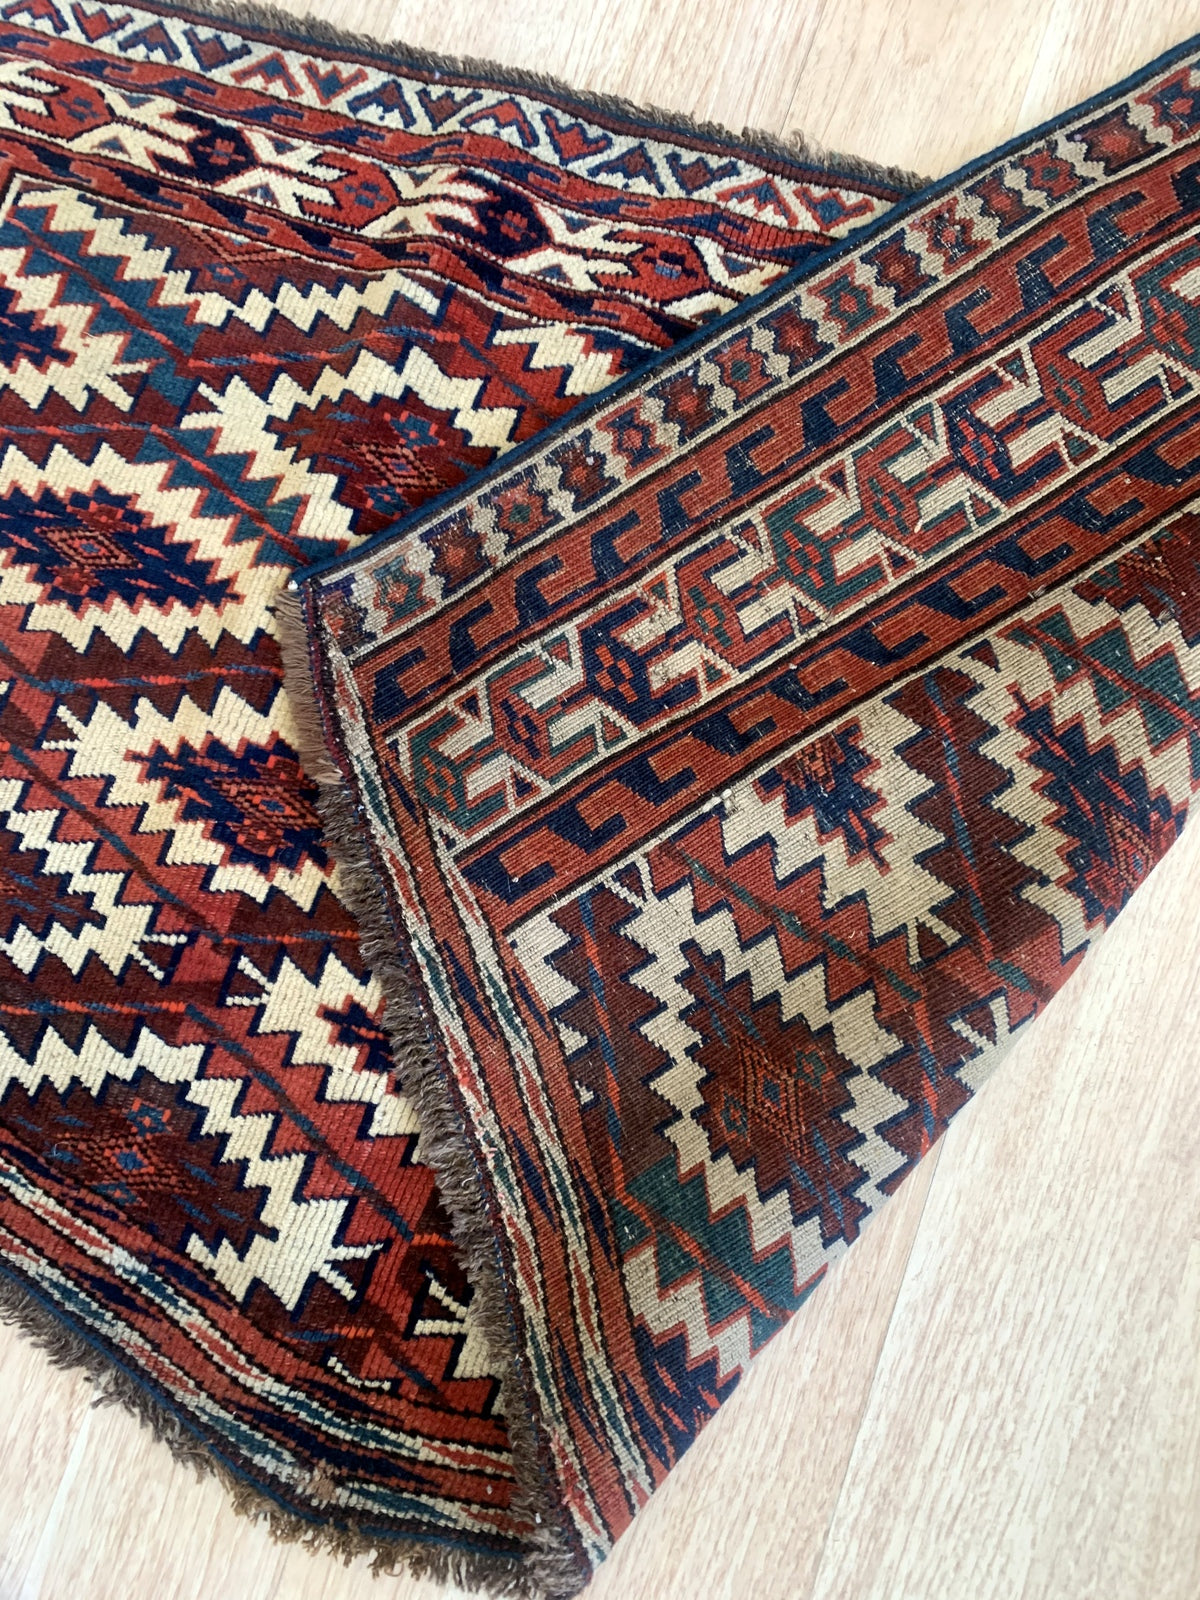 Handmade antique Turkmen Asmalik rug in original good condition. The rug has been made in the end of 19th century in Turkmenistan. All dyes on the rug are natural. This rug is collectible piece.